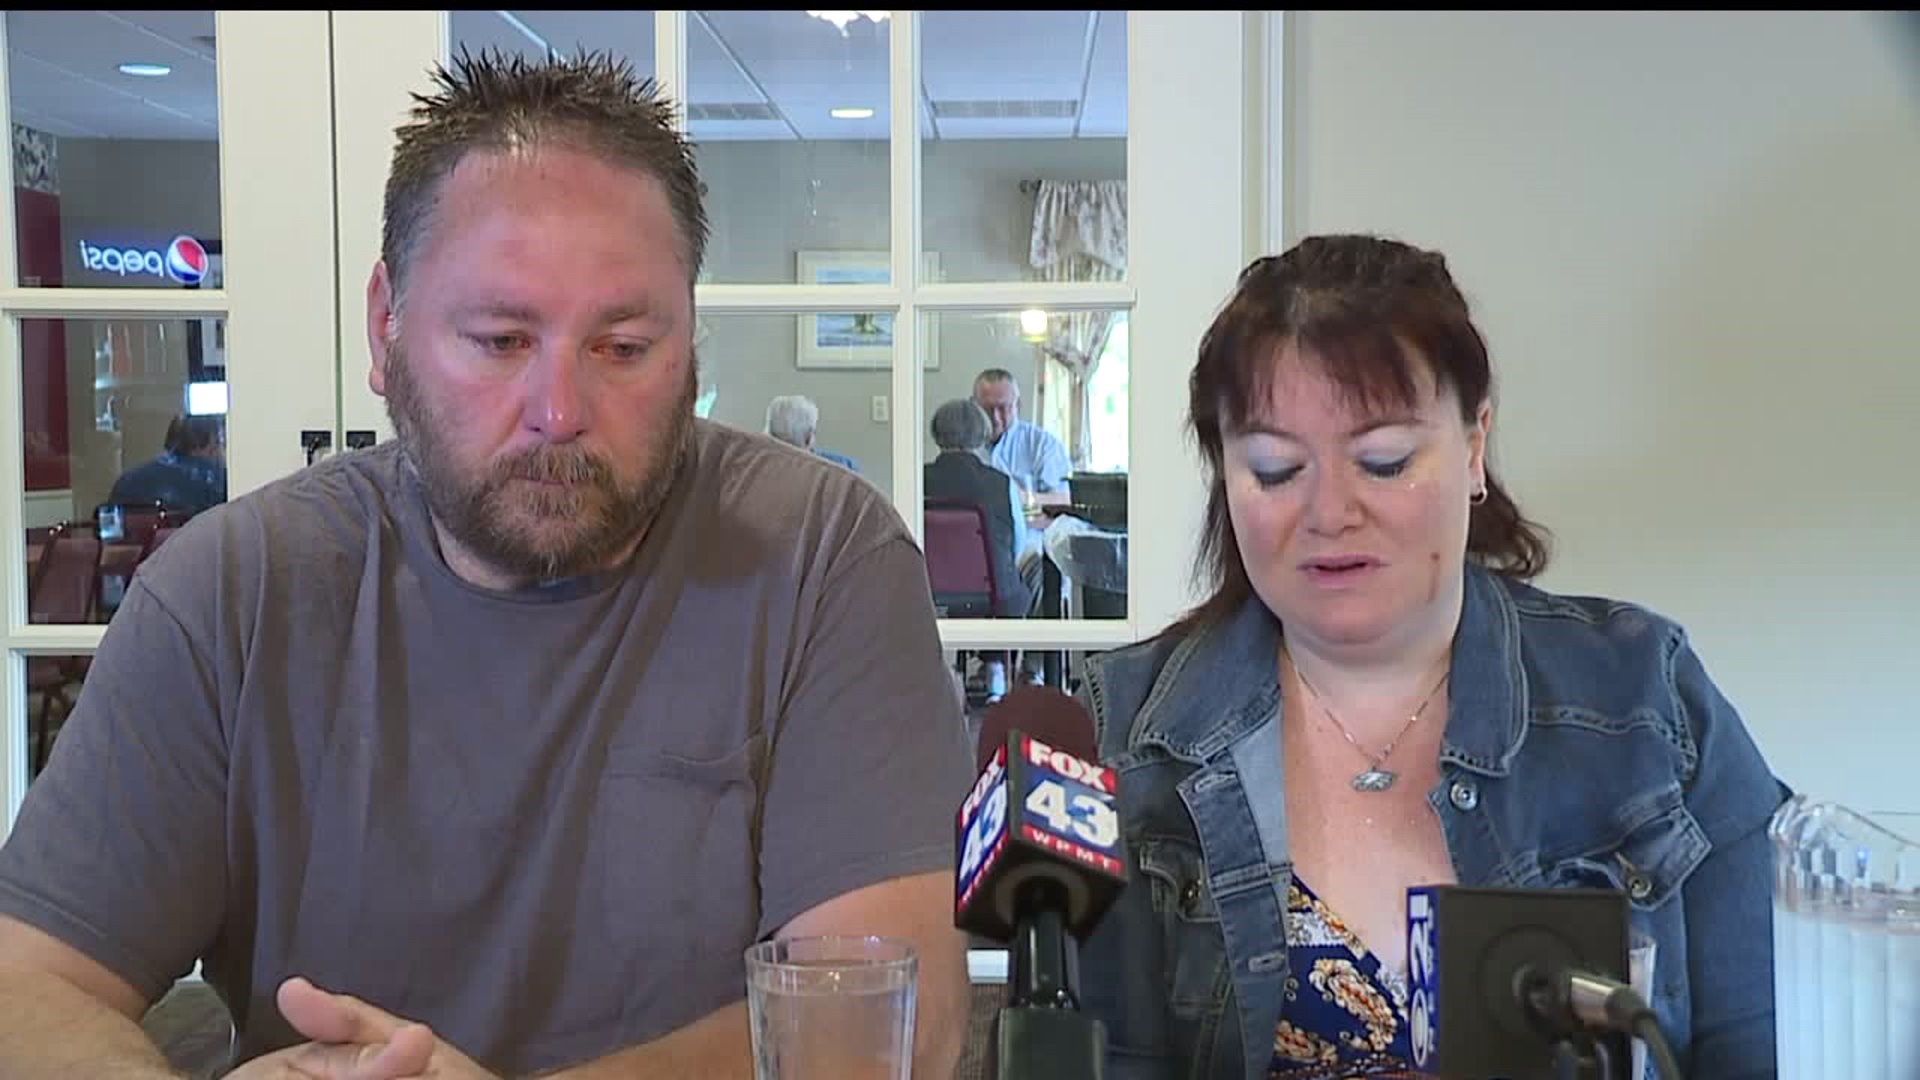 Grieving parents of boy found in Susquehanna River thankful for community support